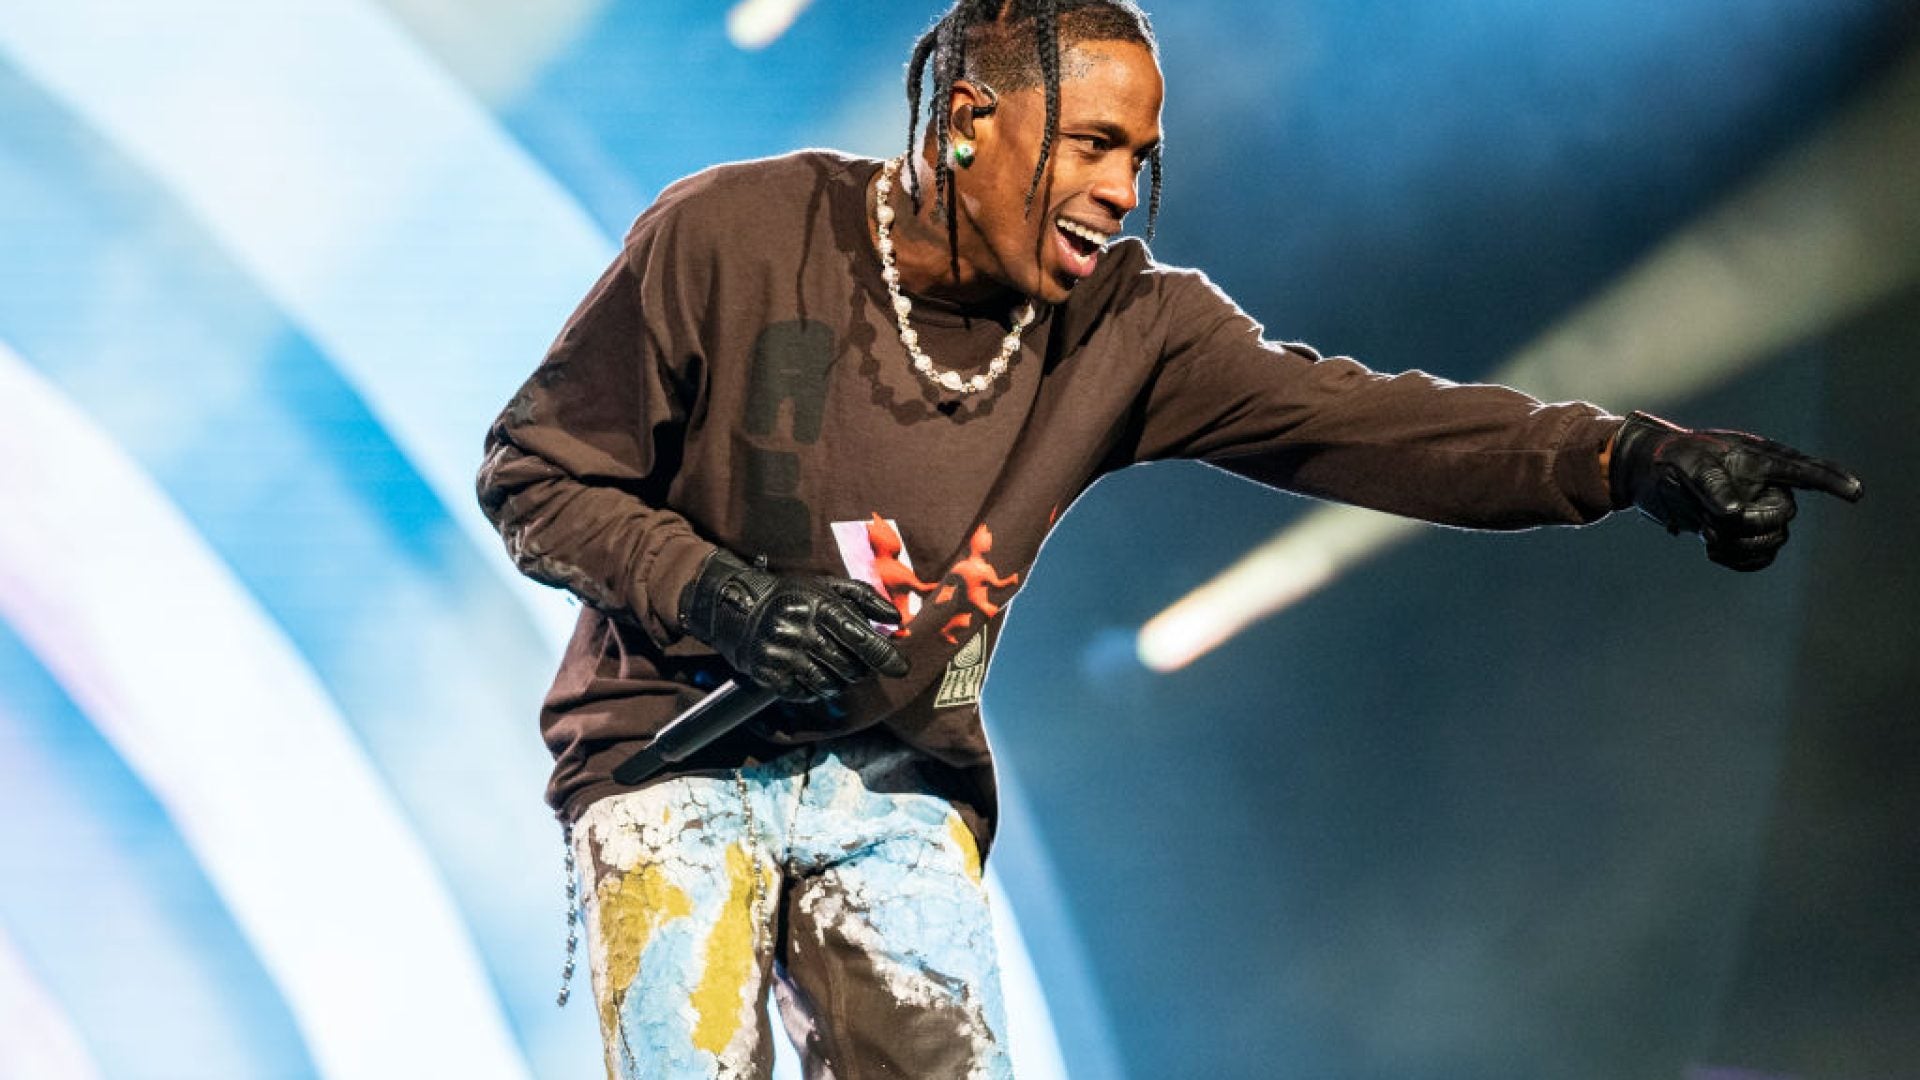 Travis Scott Will Not Face Criminal Charges Over Tragic Deaths At 2021 Astroworld Music Festival